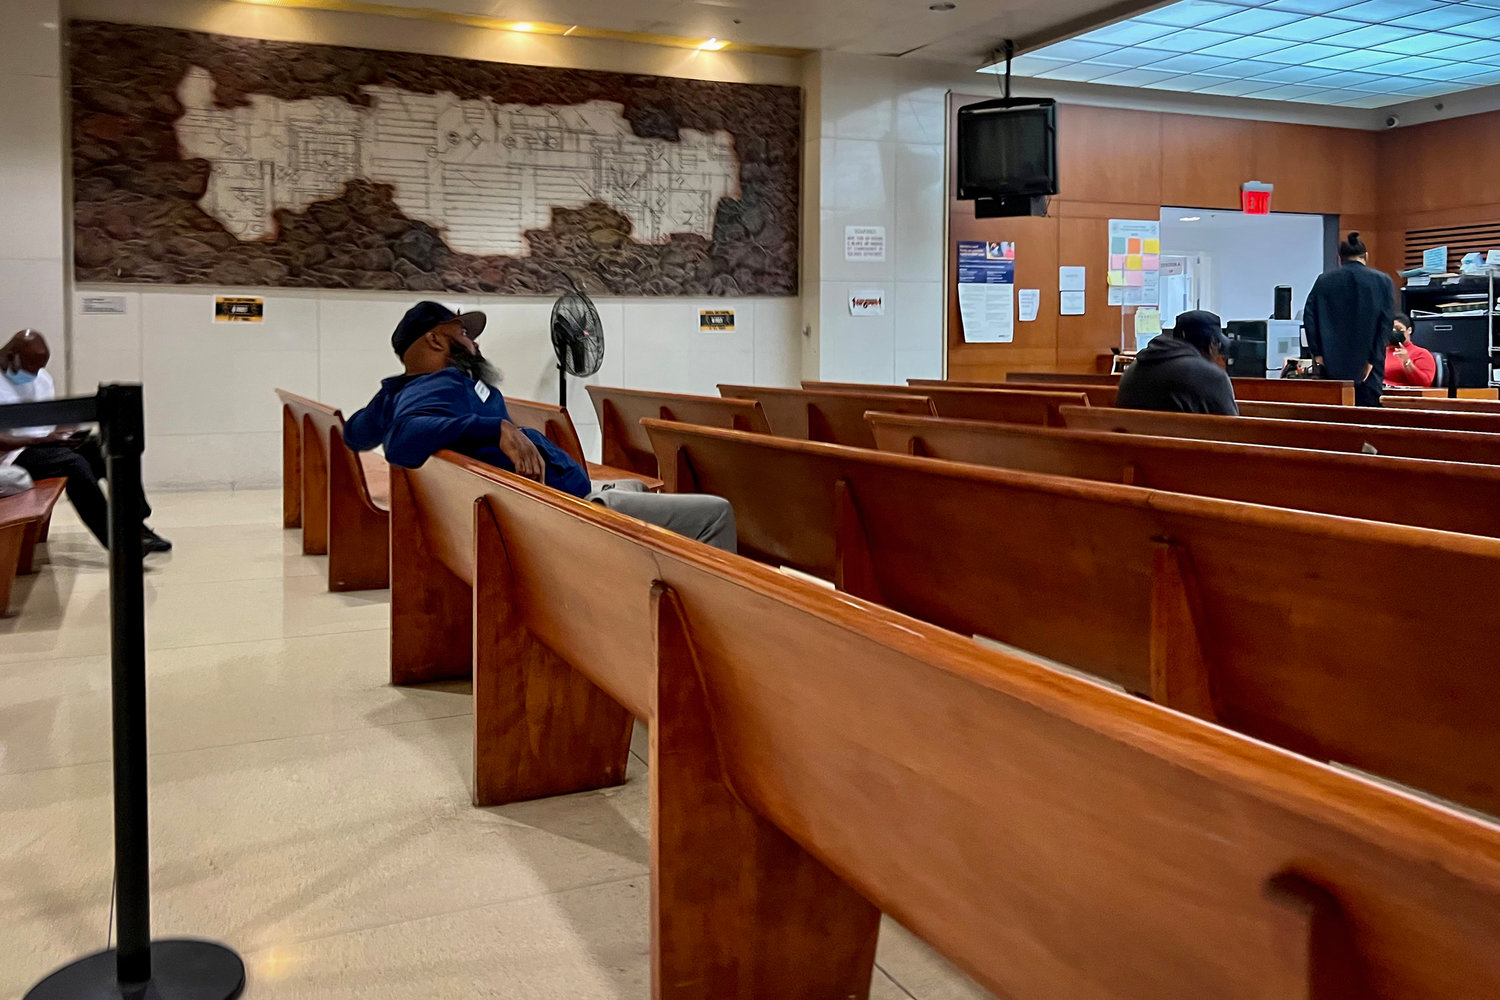 A man waits to speak with a court clerk in Room 230 at Bronx Housing Court, a large courtroom converted into a help center and outfitted with video conference stations for virtual intake in eviction filings. The room had mostly quieted down by 4 p.m. on Sept. 7.